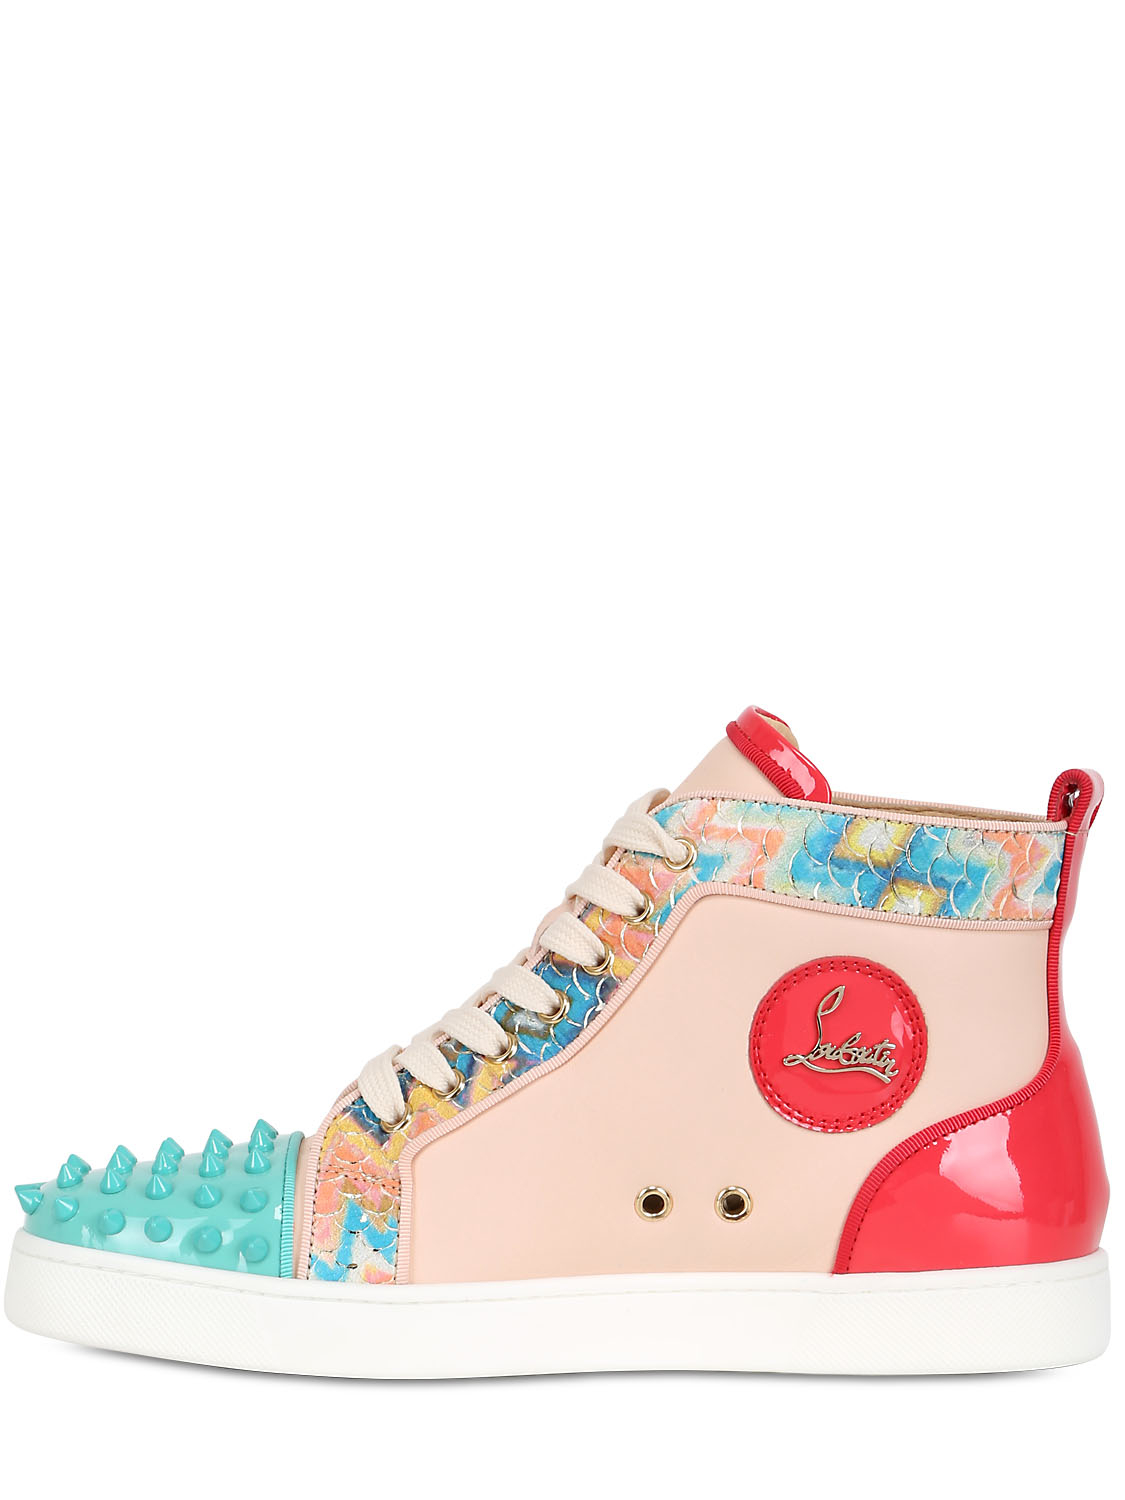 christian louboutin studded patent leather skate sneakers, Keyword